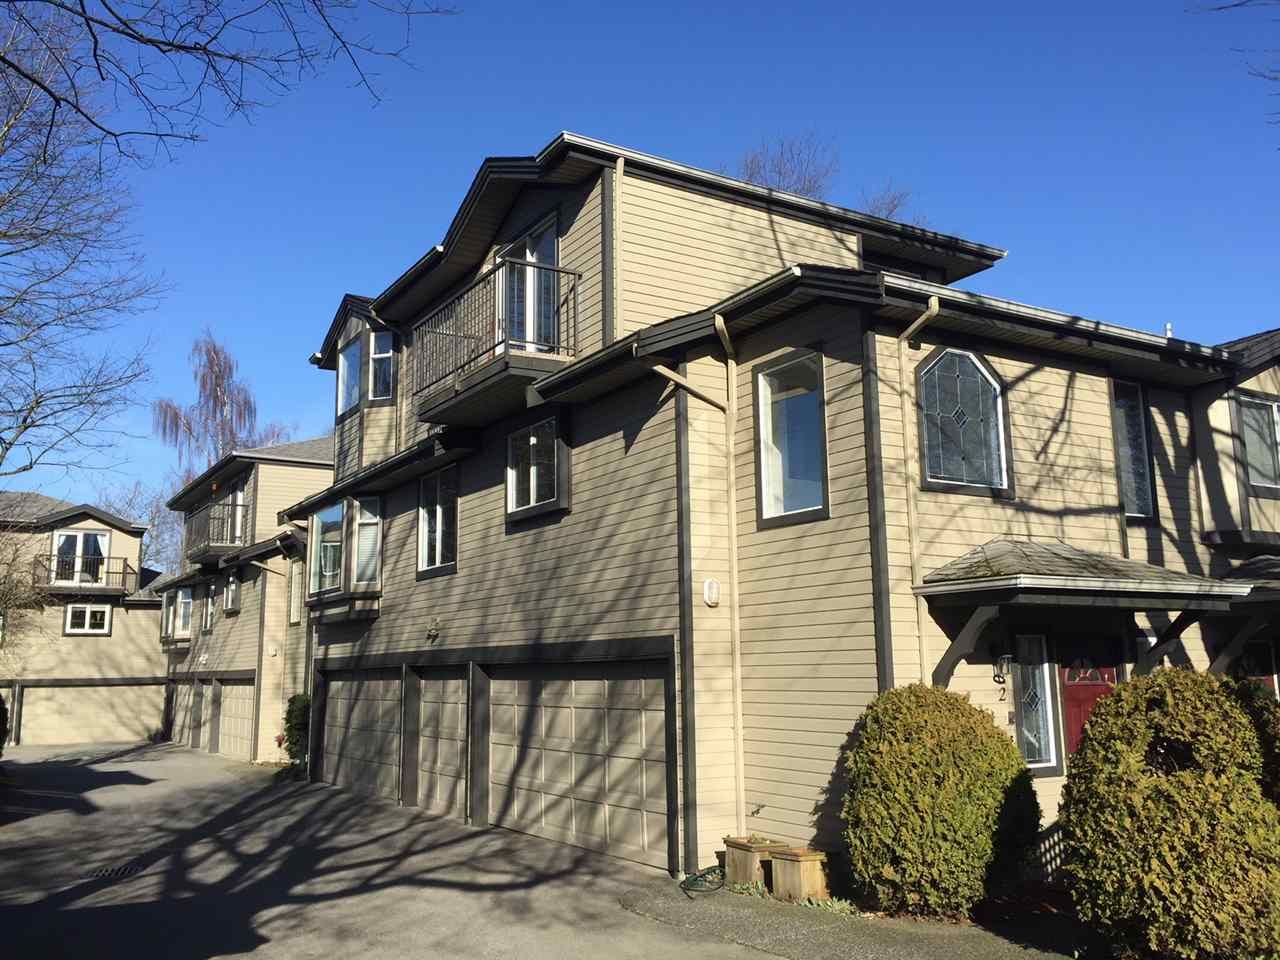 Main Photo: 2 61 E 23RD AVENUE in Vancouver: Main Townhouse for sale (Vancouver East)  : MLS®# R2225680